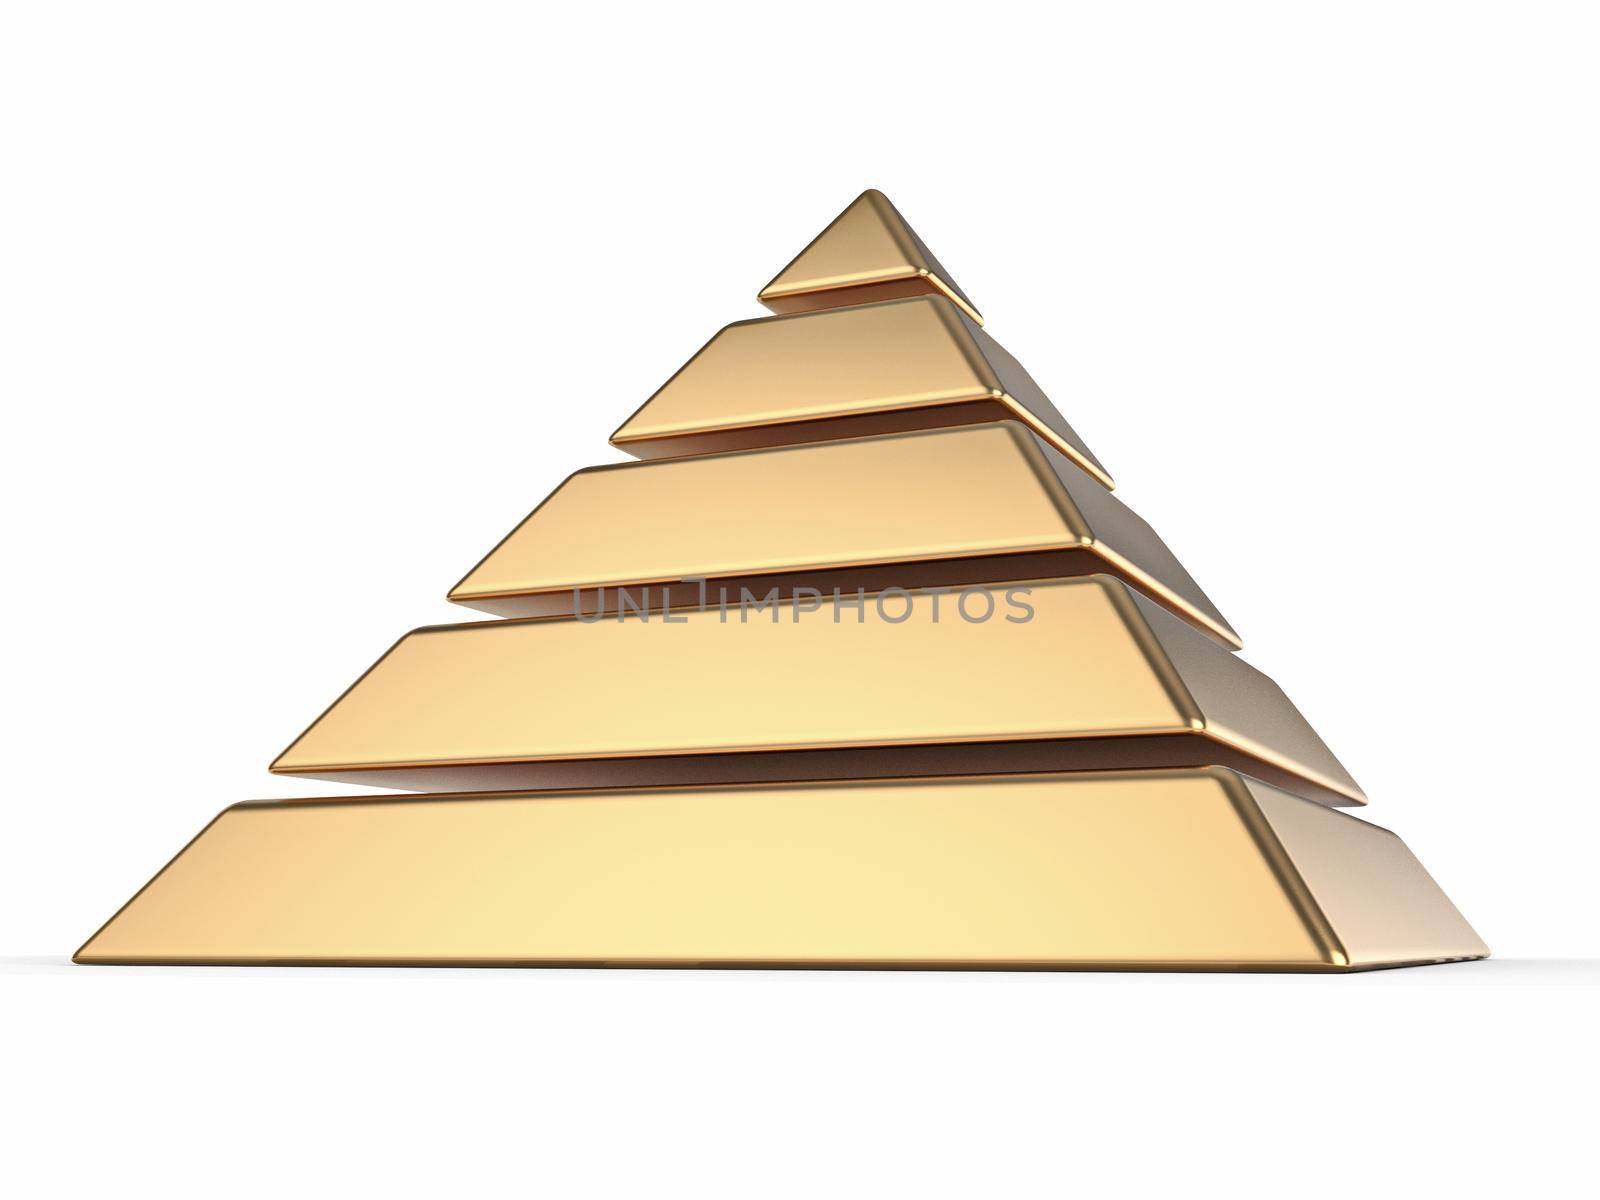 Golden pyramid 3D rendering illustration isolated on white background